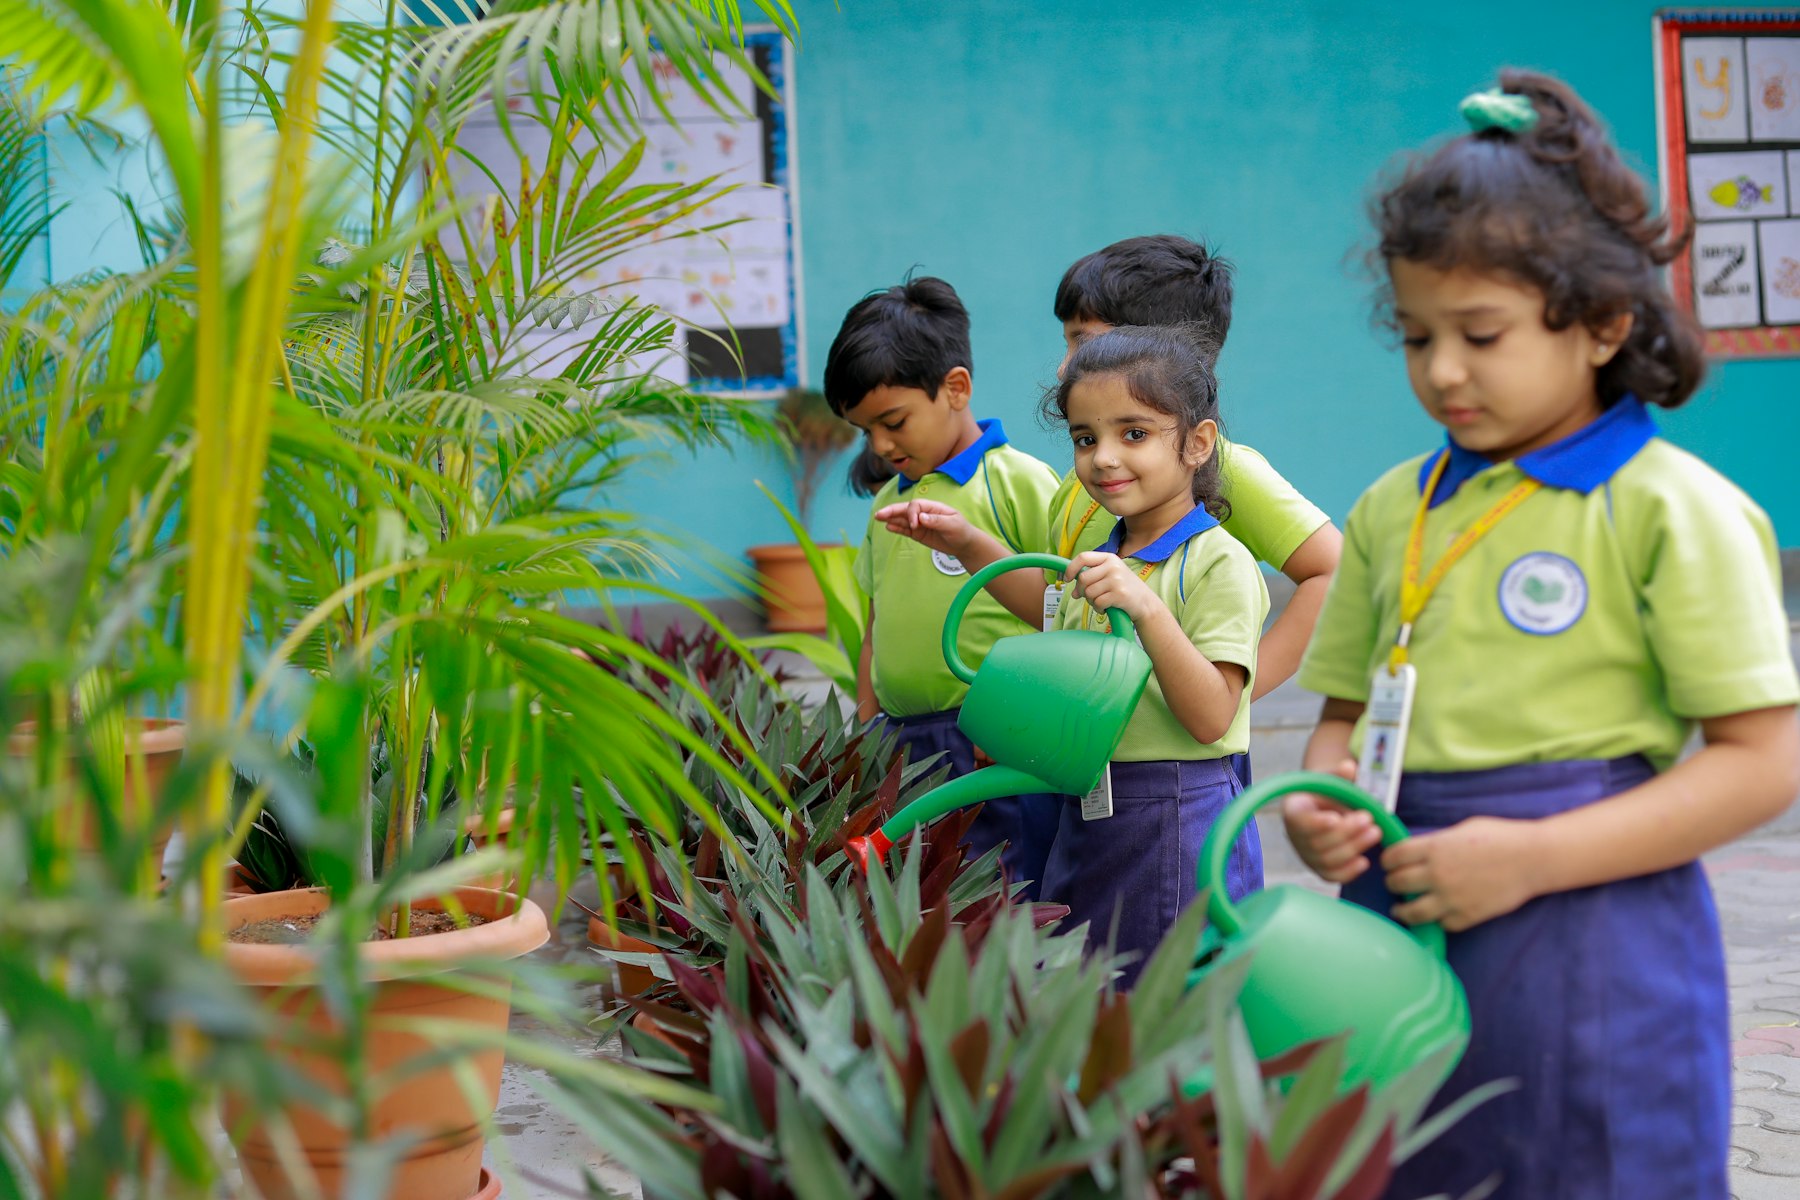 From an early age, students at the Platinum Jubilee High School in Telangana, India, get hands-on experience caring for plants. AKDN